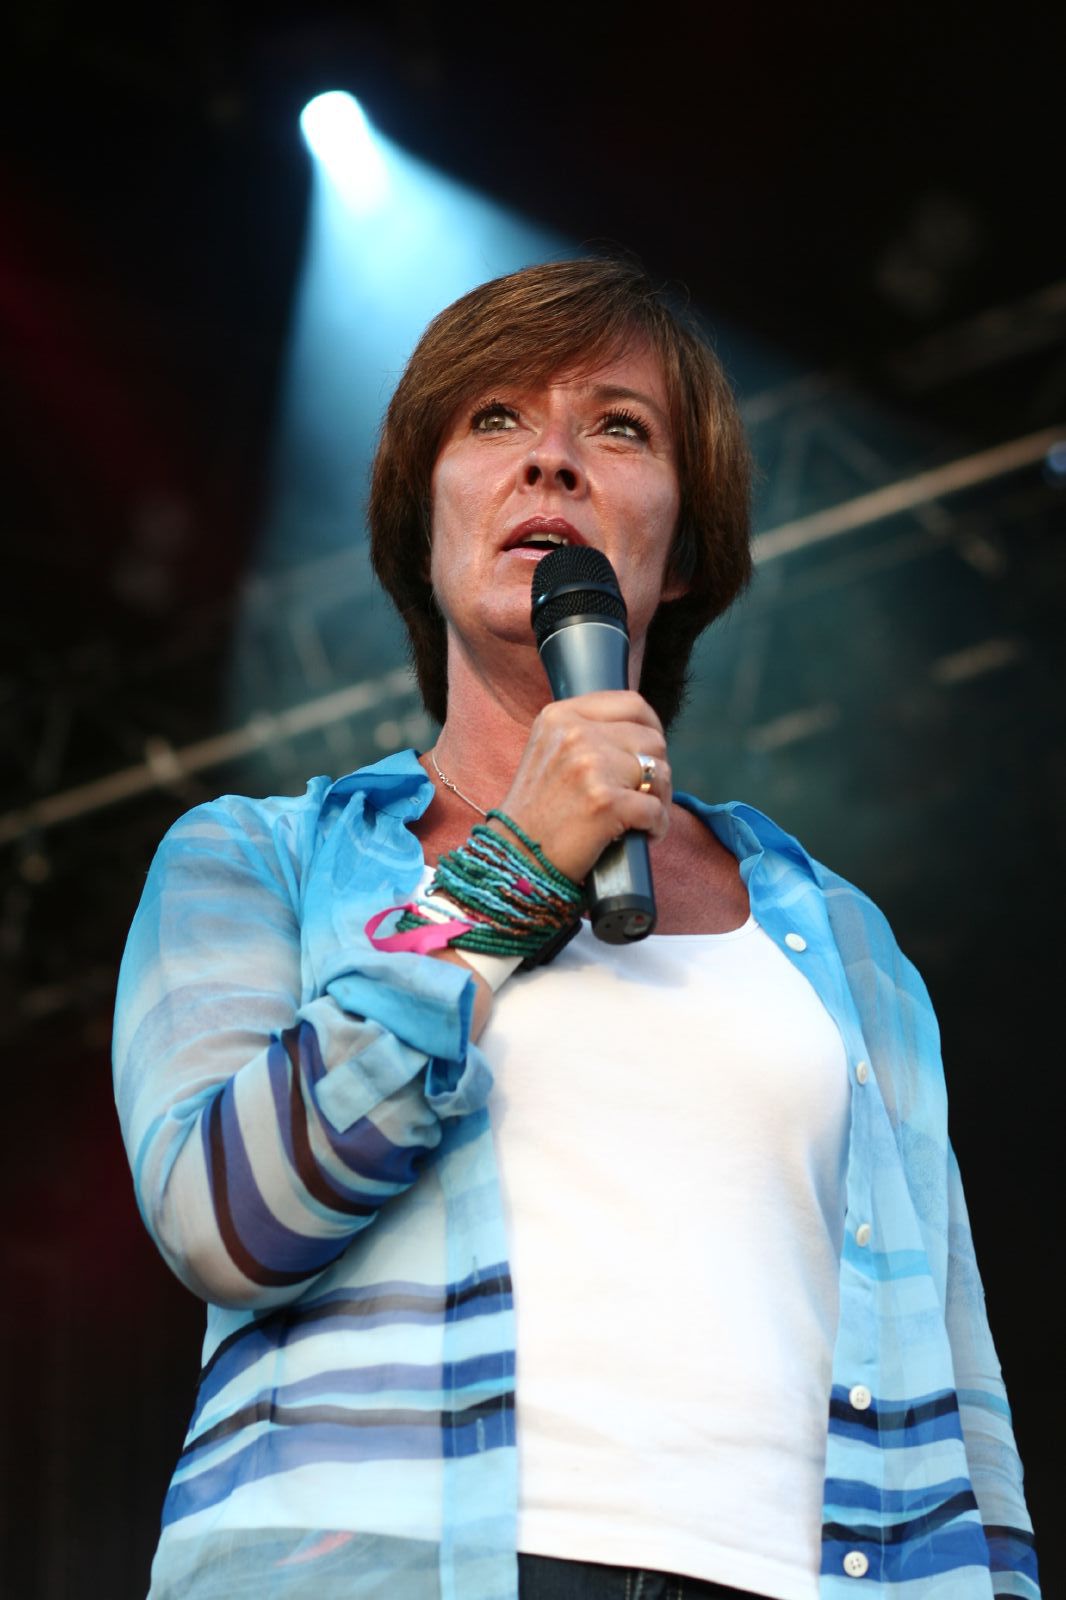 the woman is on stage with her hair sticking out and a microphone in her mouth